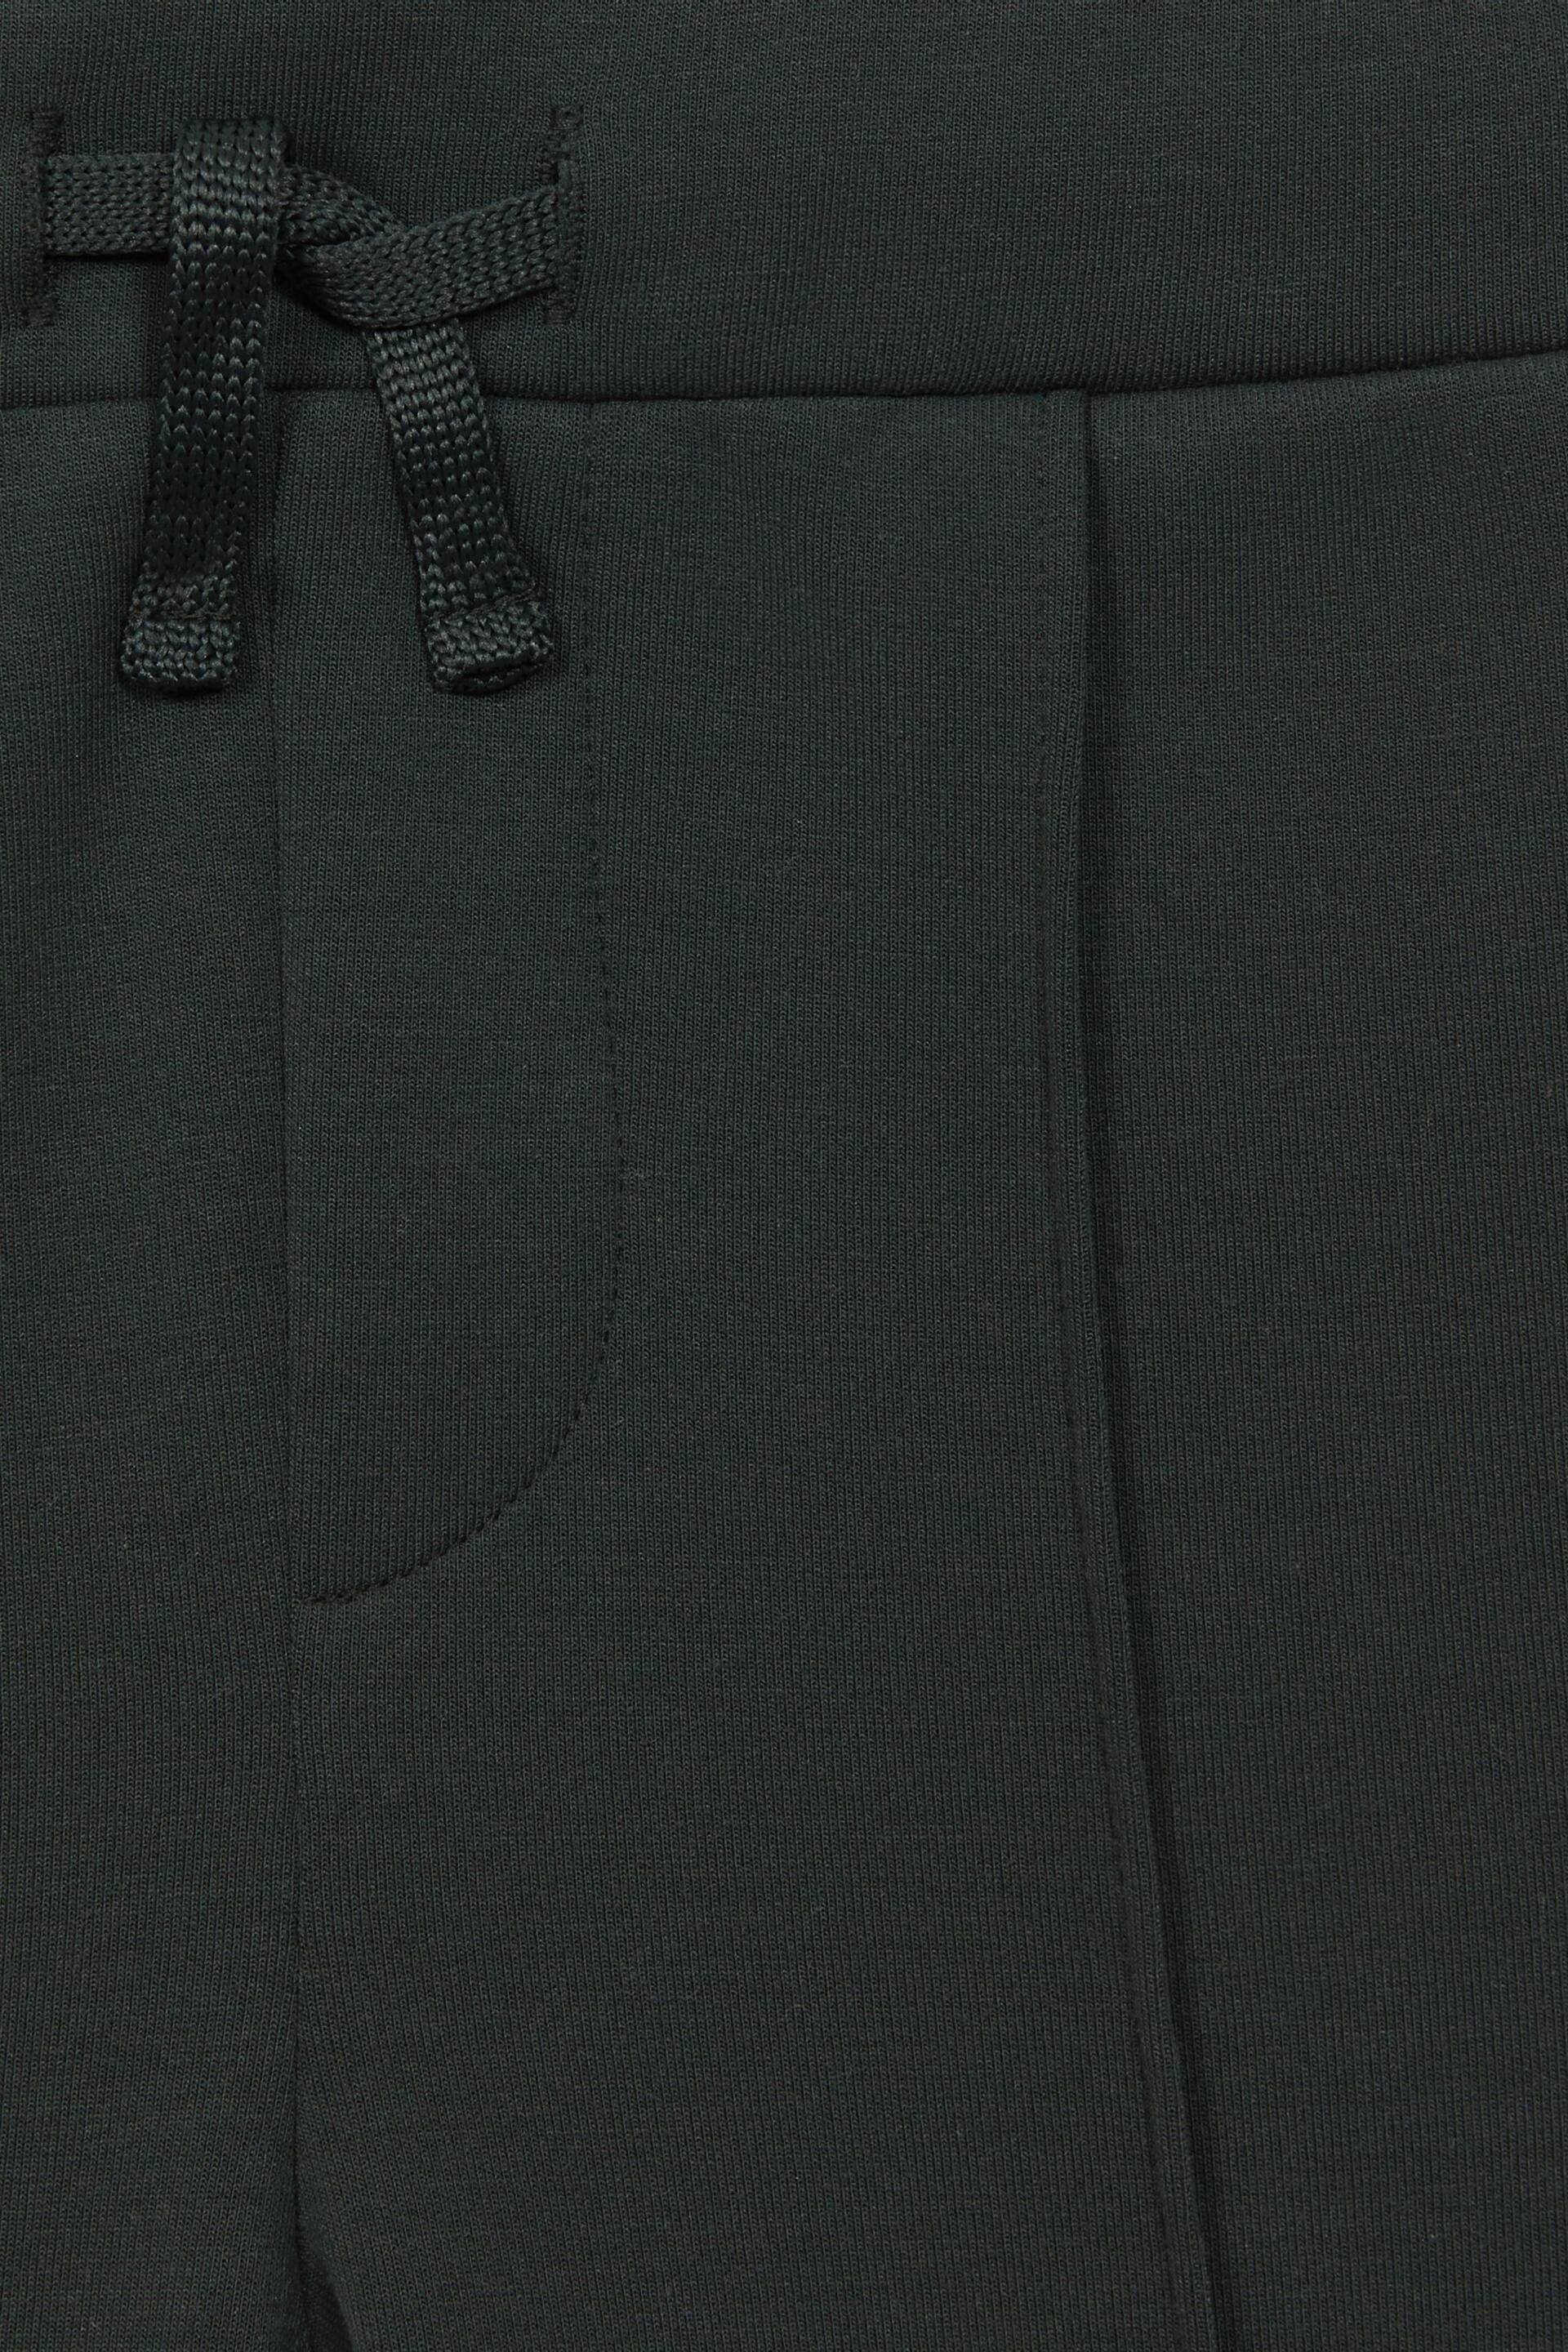 Reiss Forest Green Premier Senior Drawstring Jersey Joggers - Image 5 of 5